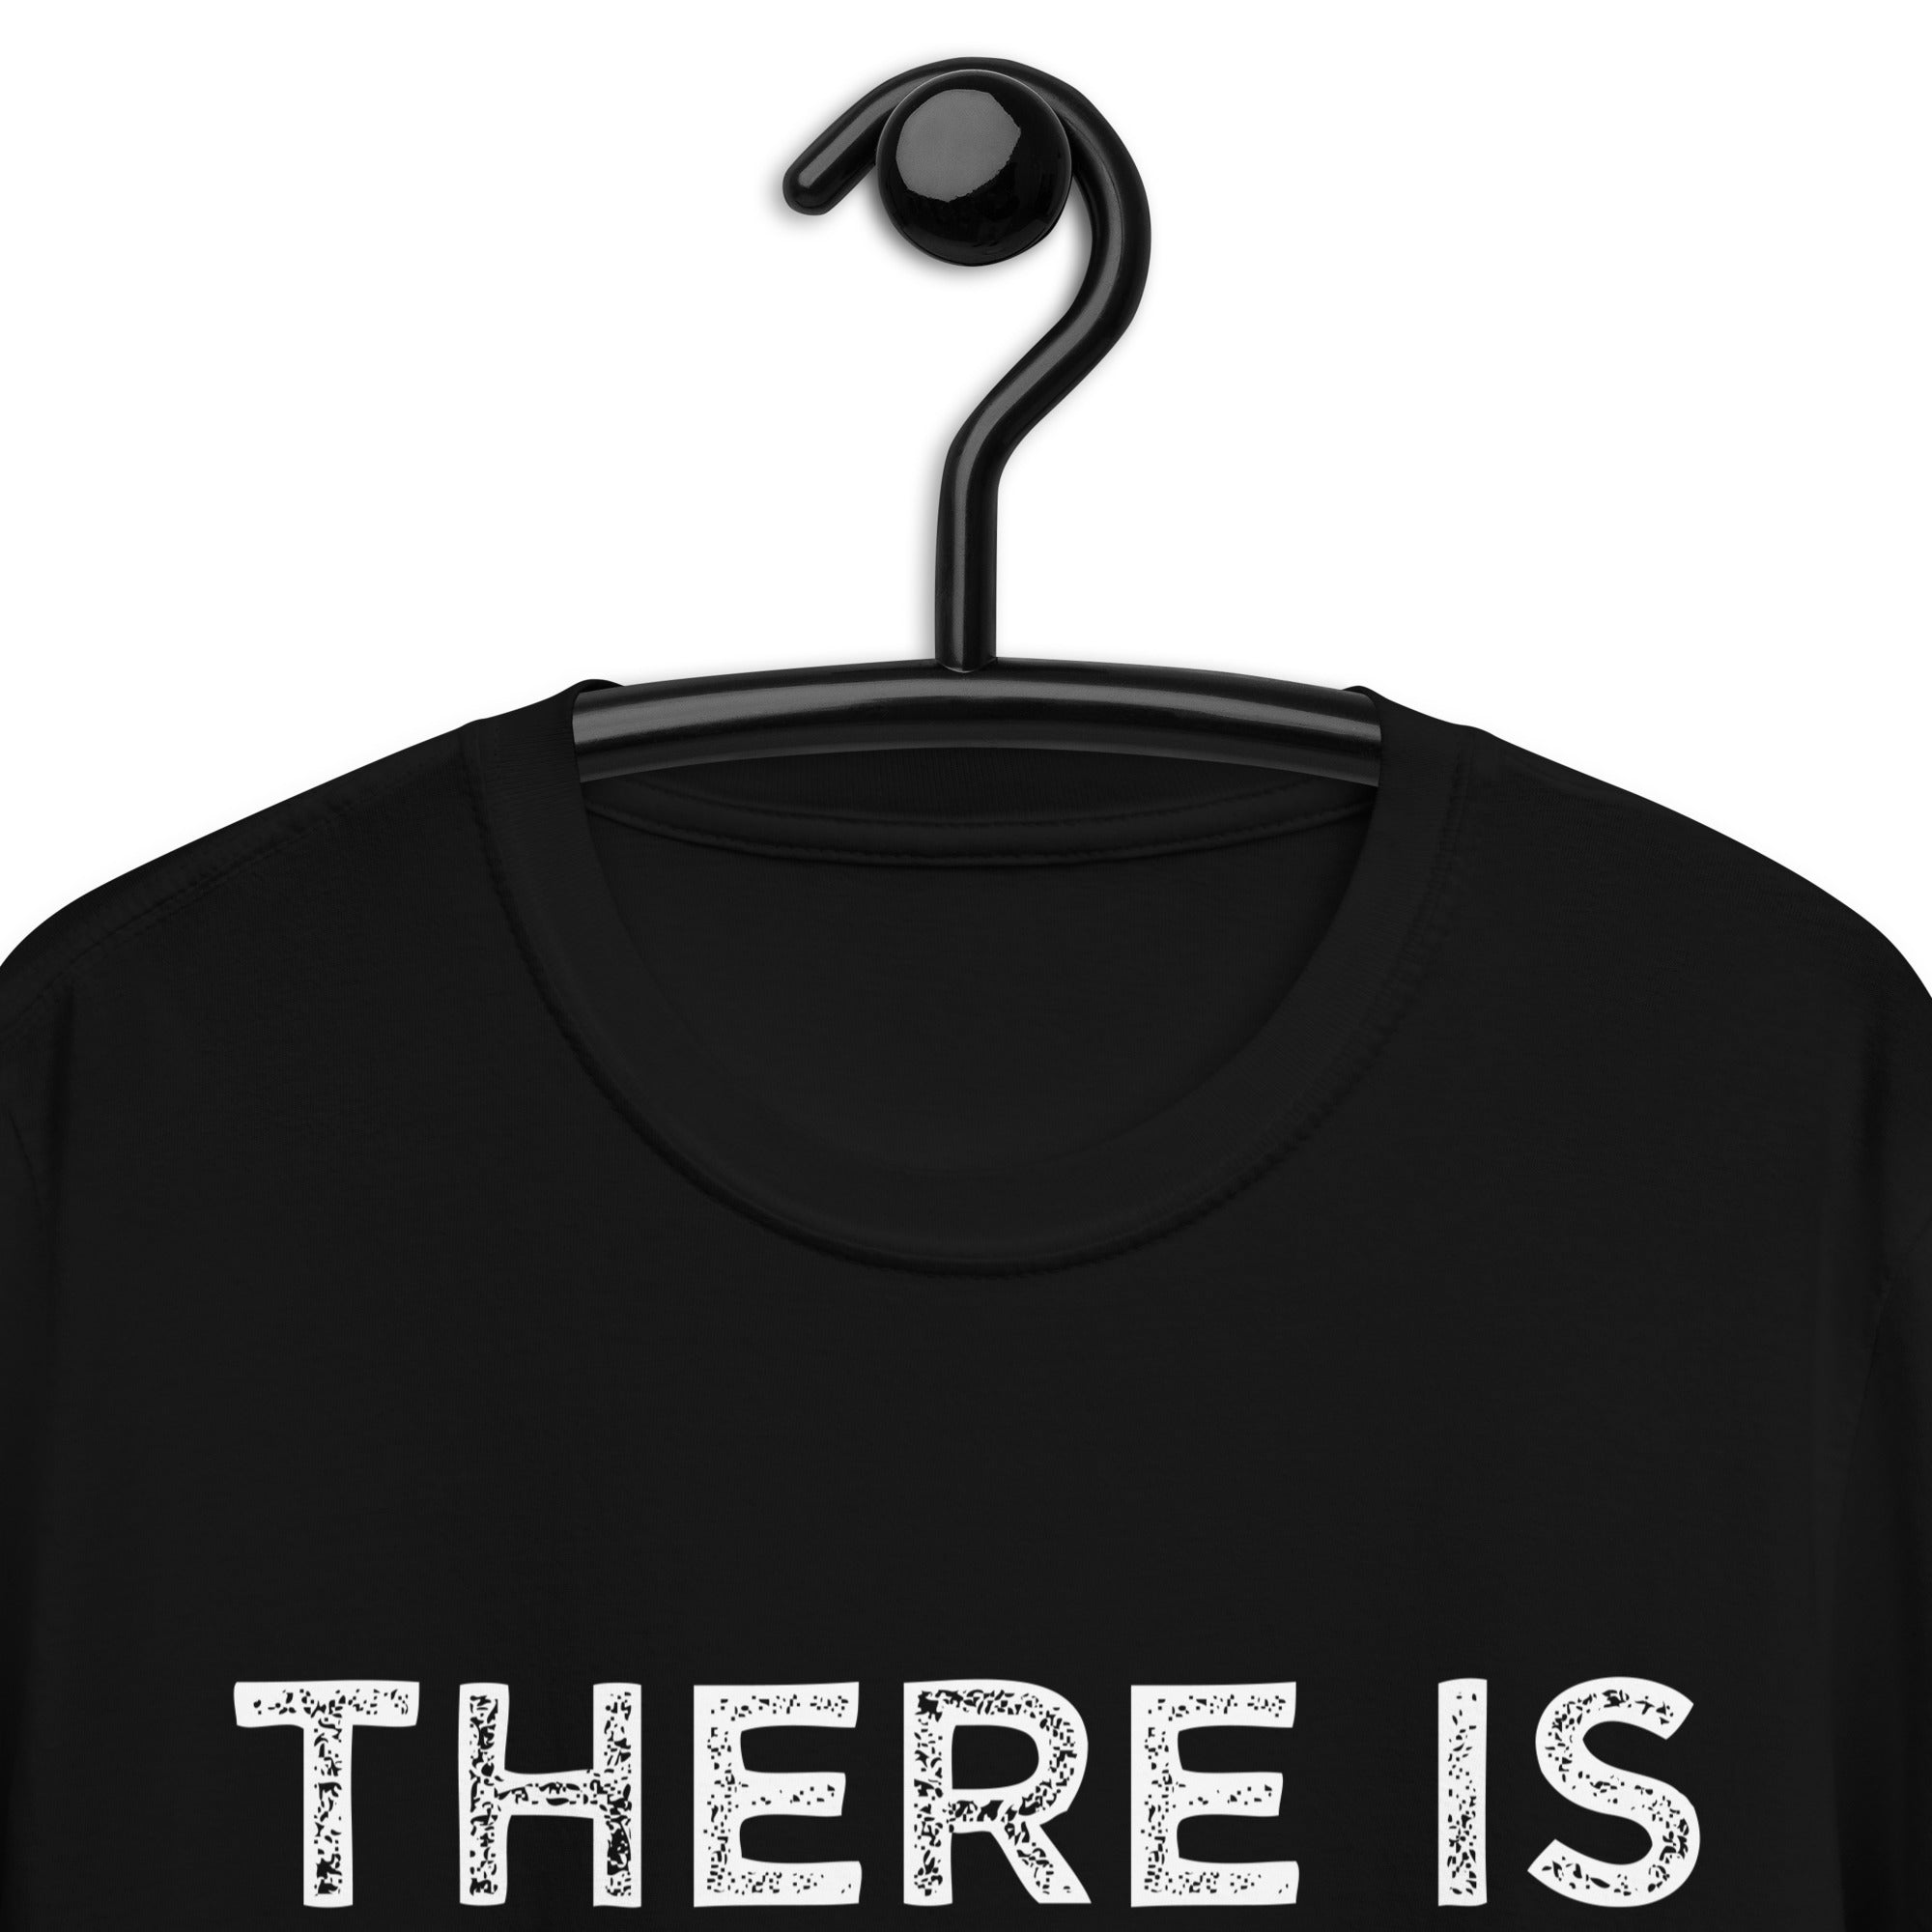 Short-Sleeve Unisex T-Shirt | There is no spoon